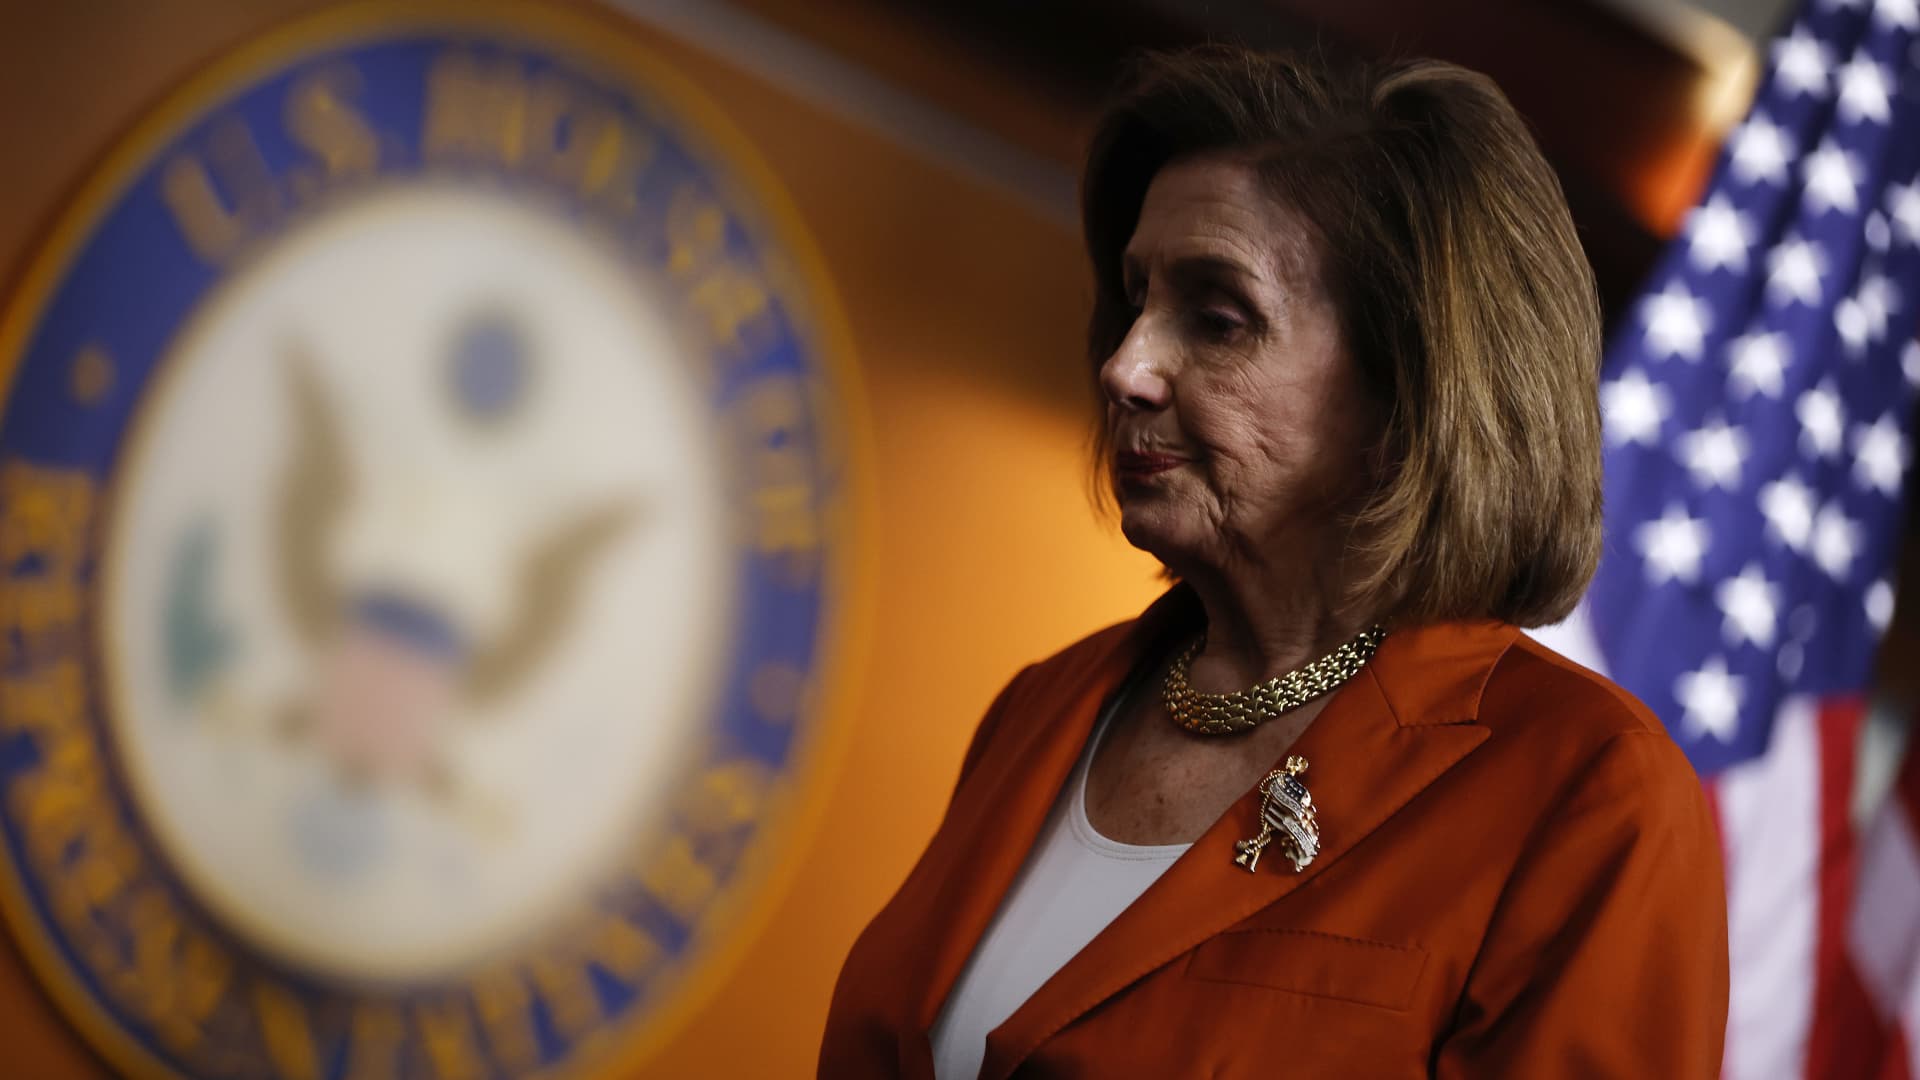 Pelosi says Democrats are mulling plans to protect abortion access, info stored in reproductive health apps